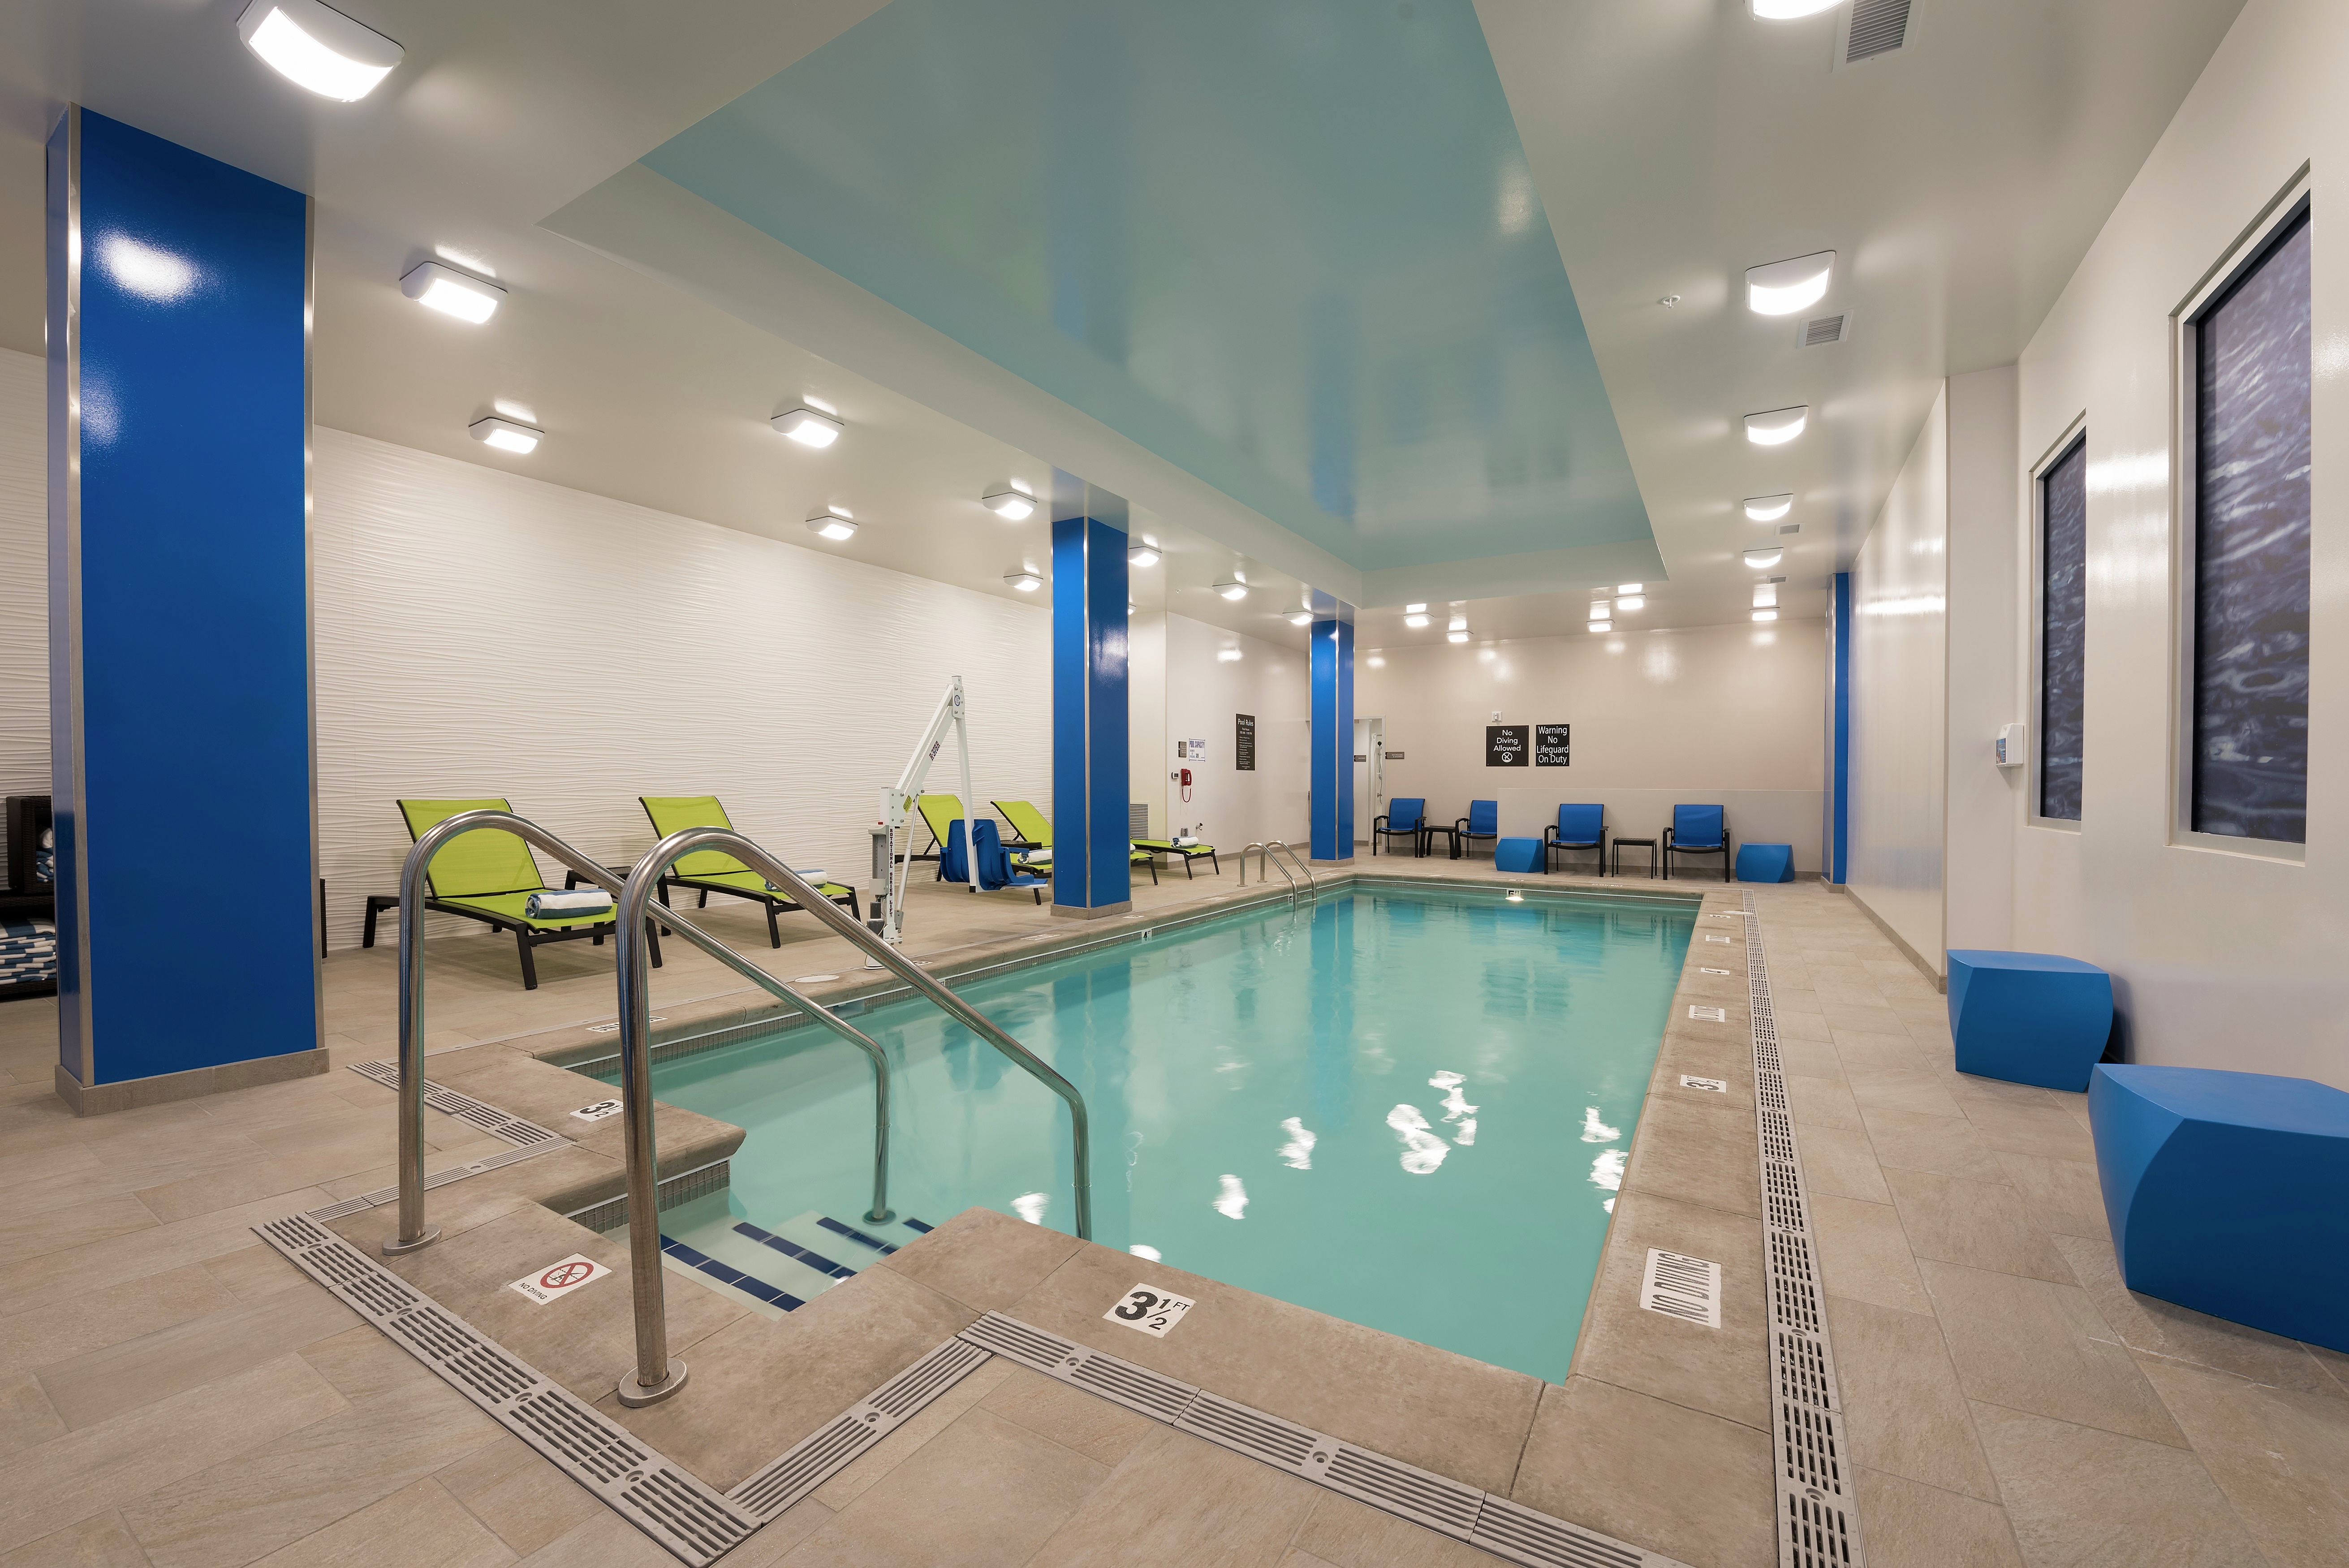 Indoor Pool and With Green Loungers, Blue Chairs, and Windows